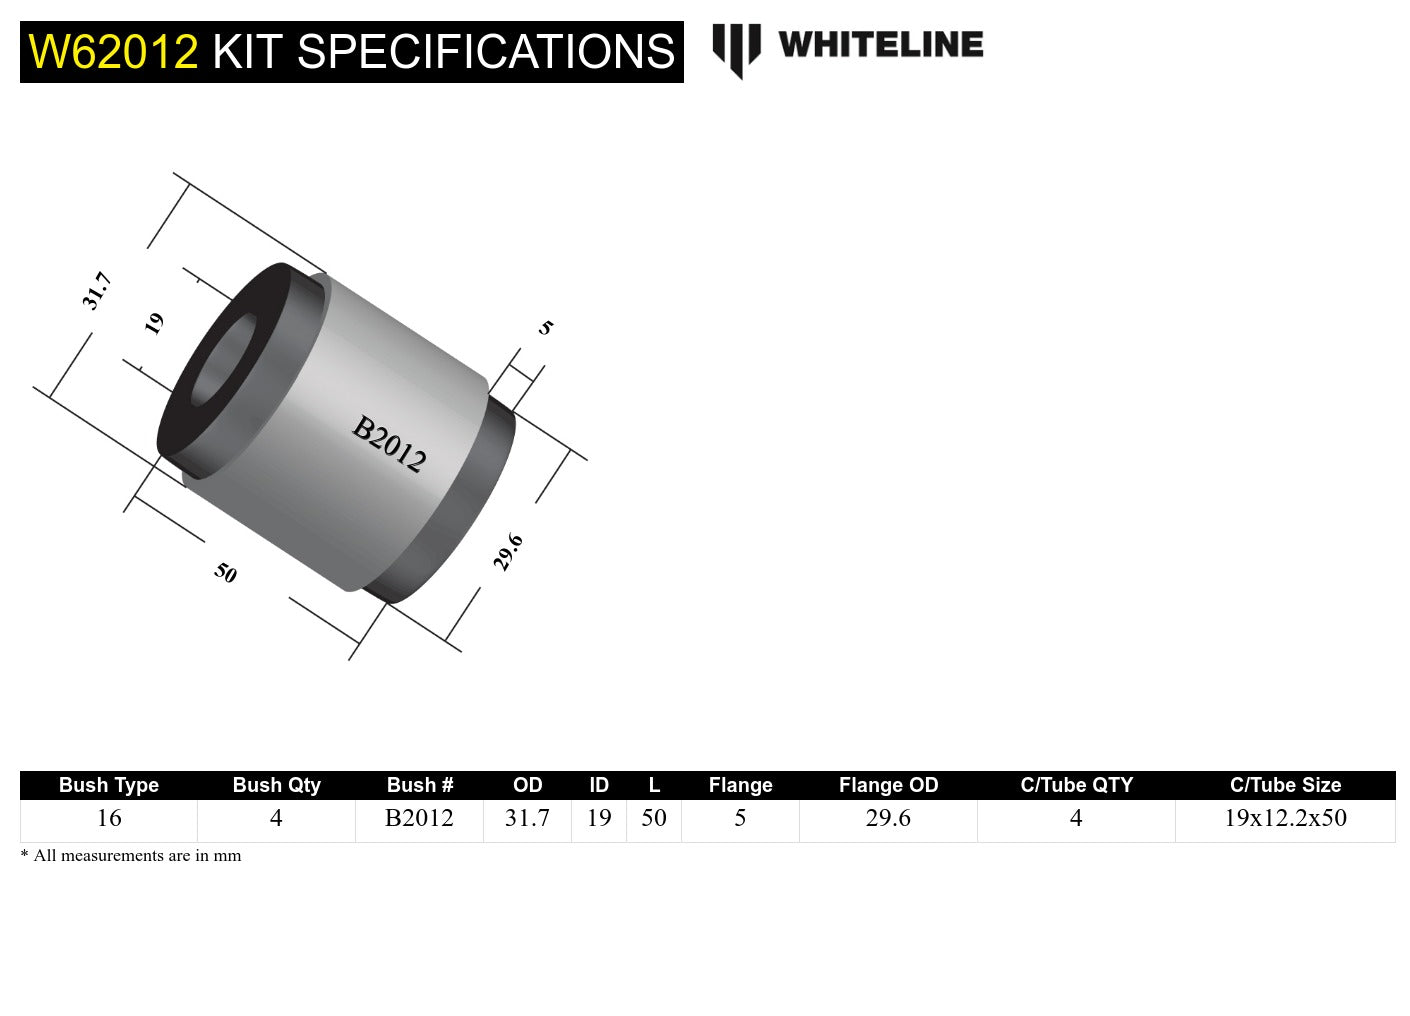 Control arm - lower front inner bushing